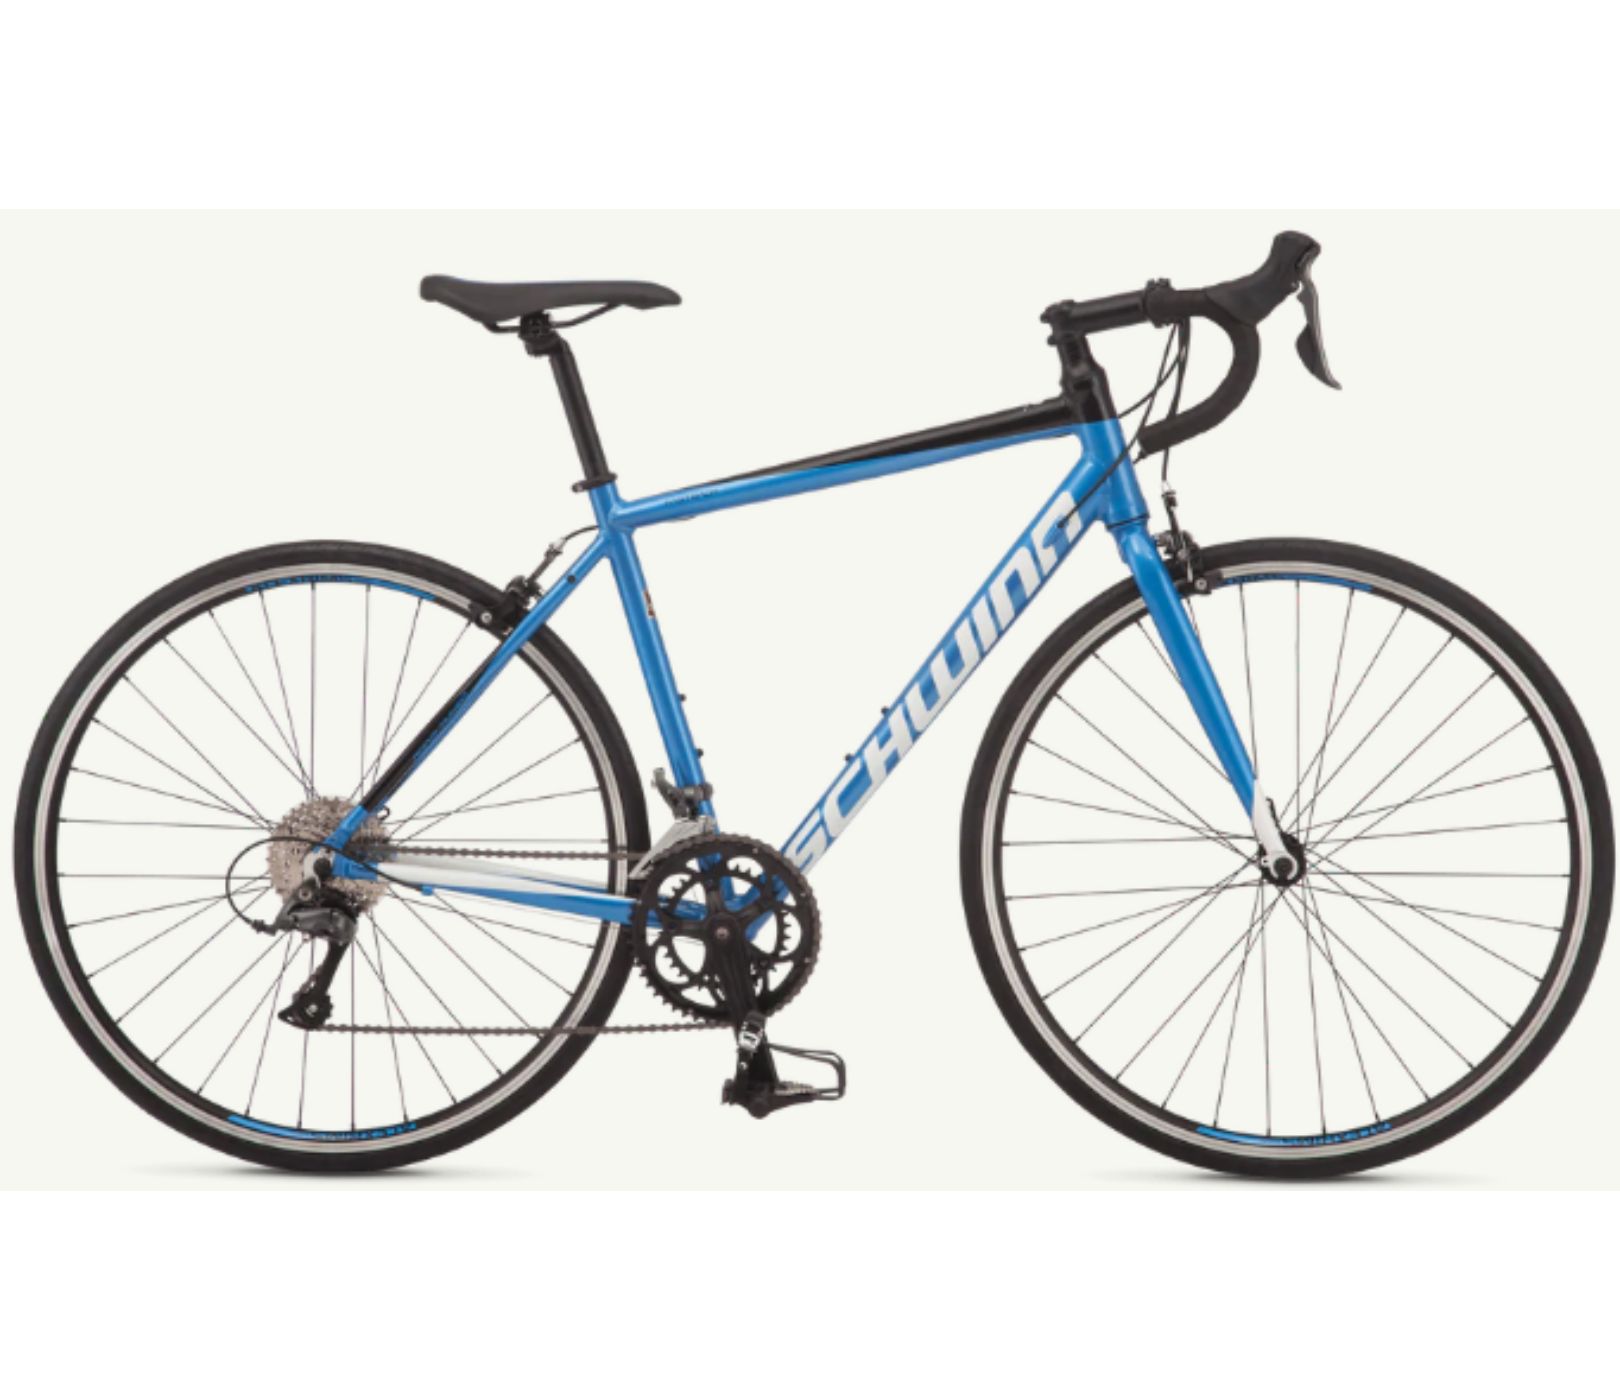 A Detailed Guide to Choosing the Best Road Bike